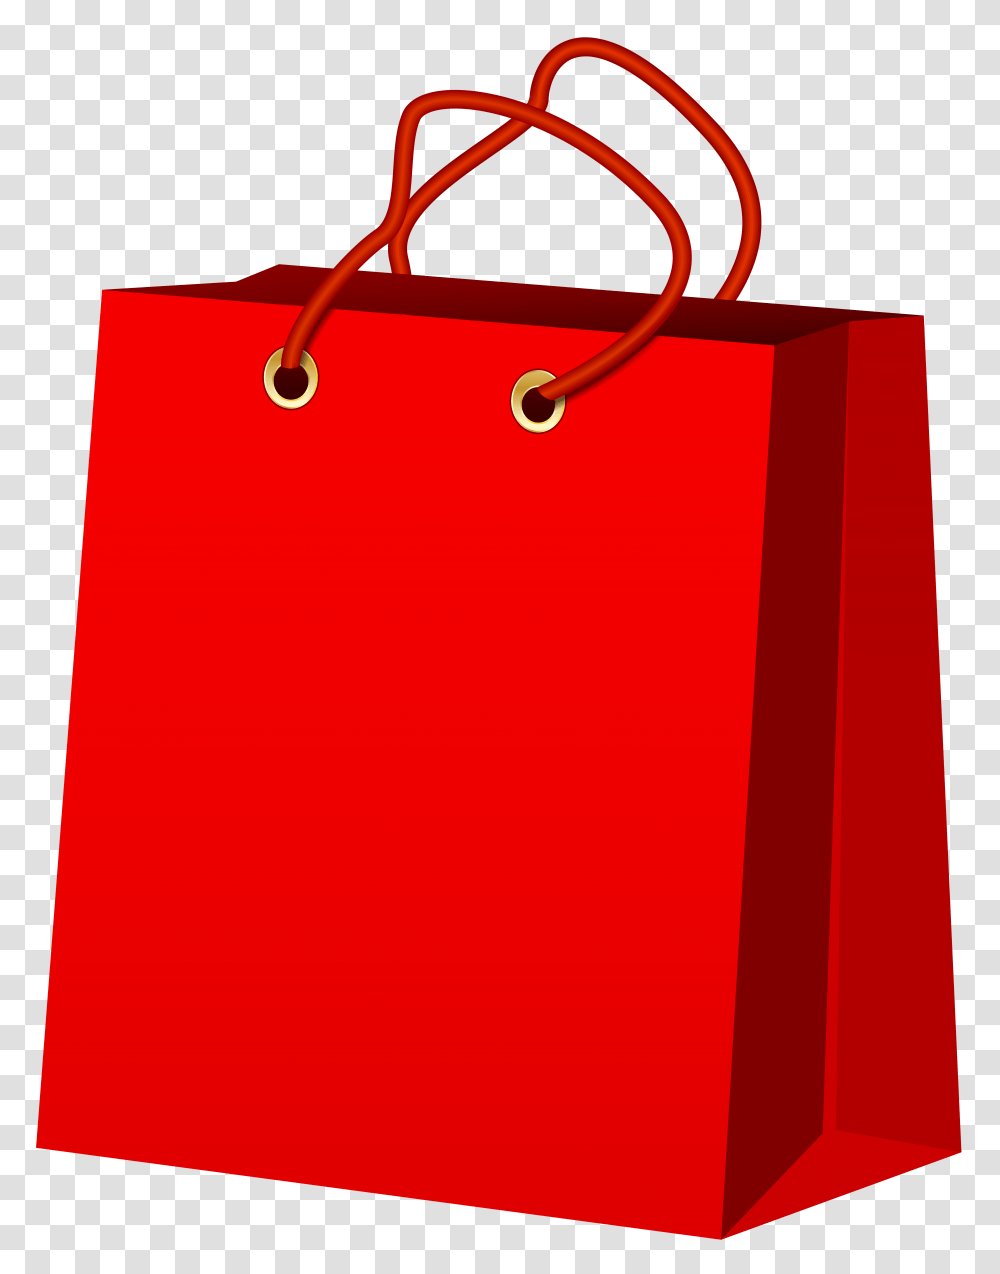 Shopping Bags Trolleys Handbag Clip Art Grocery Bag Clipart, Dynamite, Bomb, Weapon, Weaponry Transparent Png